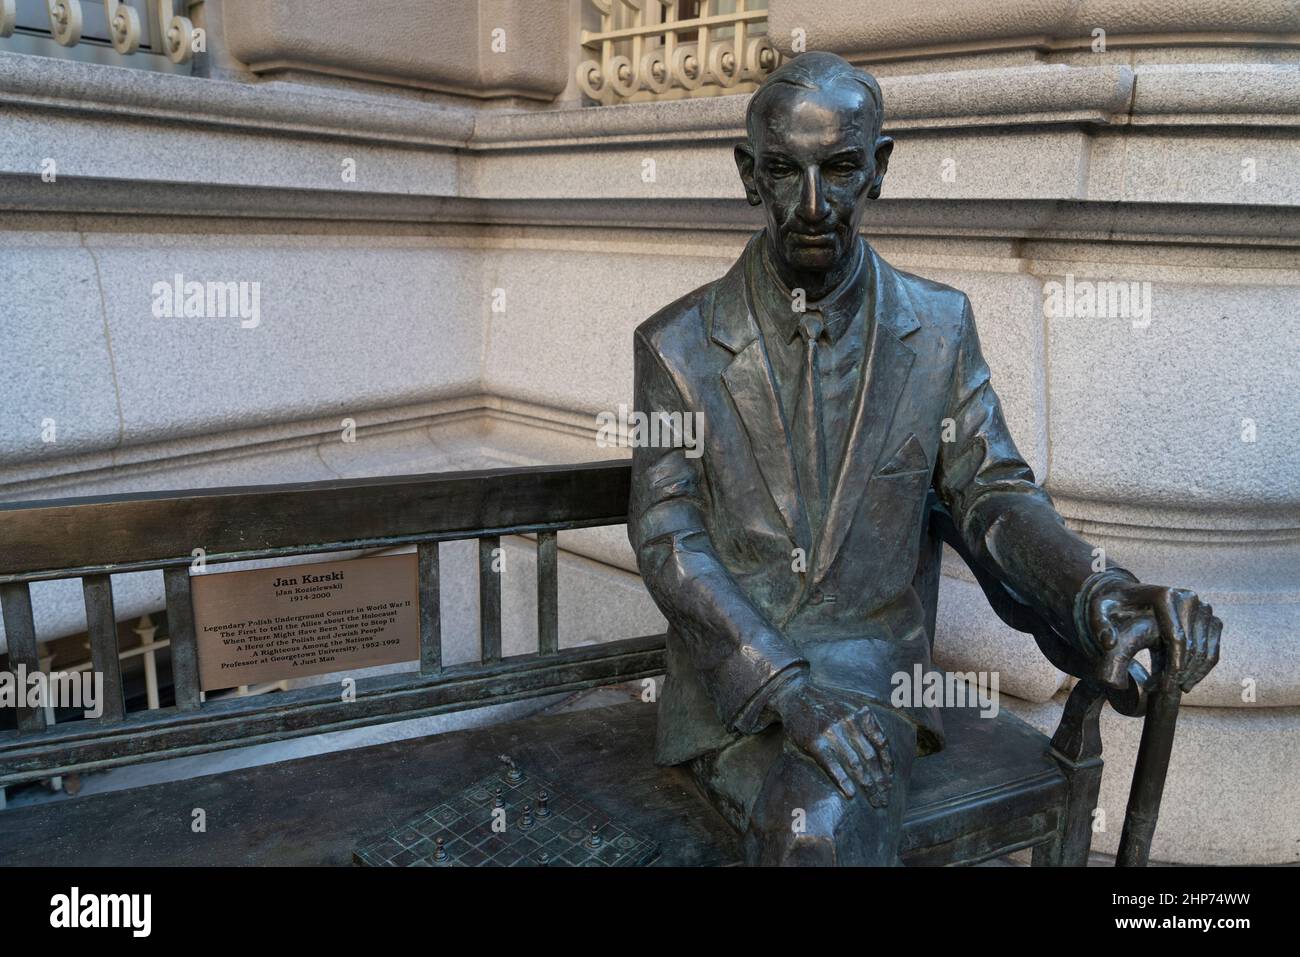 A statue of Jan Karski is at the corner of 37th Street and Madison Ave., outside the Consulate General of the Republic of Poland in New York. Stock Photo